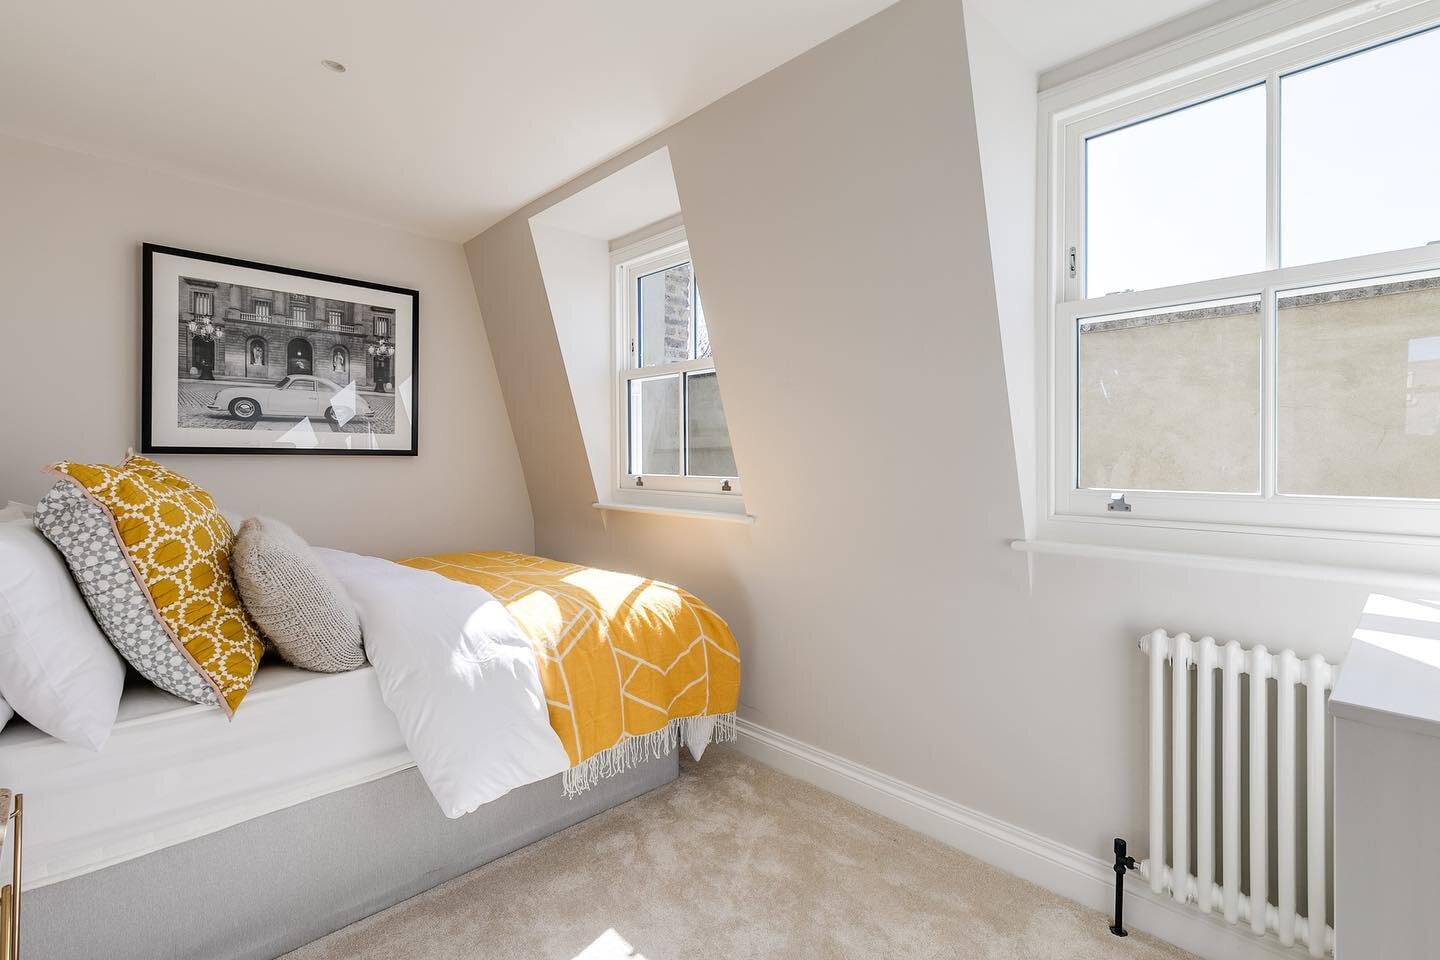 Bring the sunshine in with our premium sash windows and make the most of any space!

.⁠
.⁠
.⁠
 #projectlondon #homerenovation #interiordesign #houseextensions #maximisespace #greenkitchen #slidingdoors #summerhomestyle #nottinghillhomes #homeimprovem